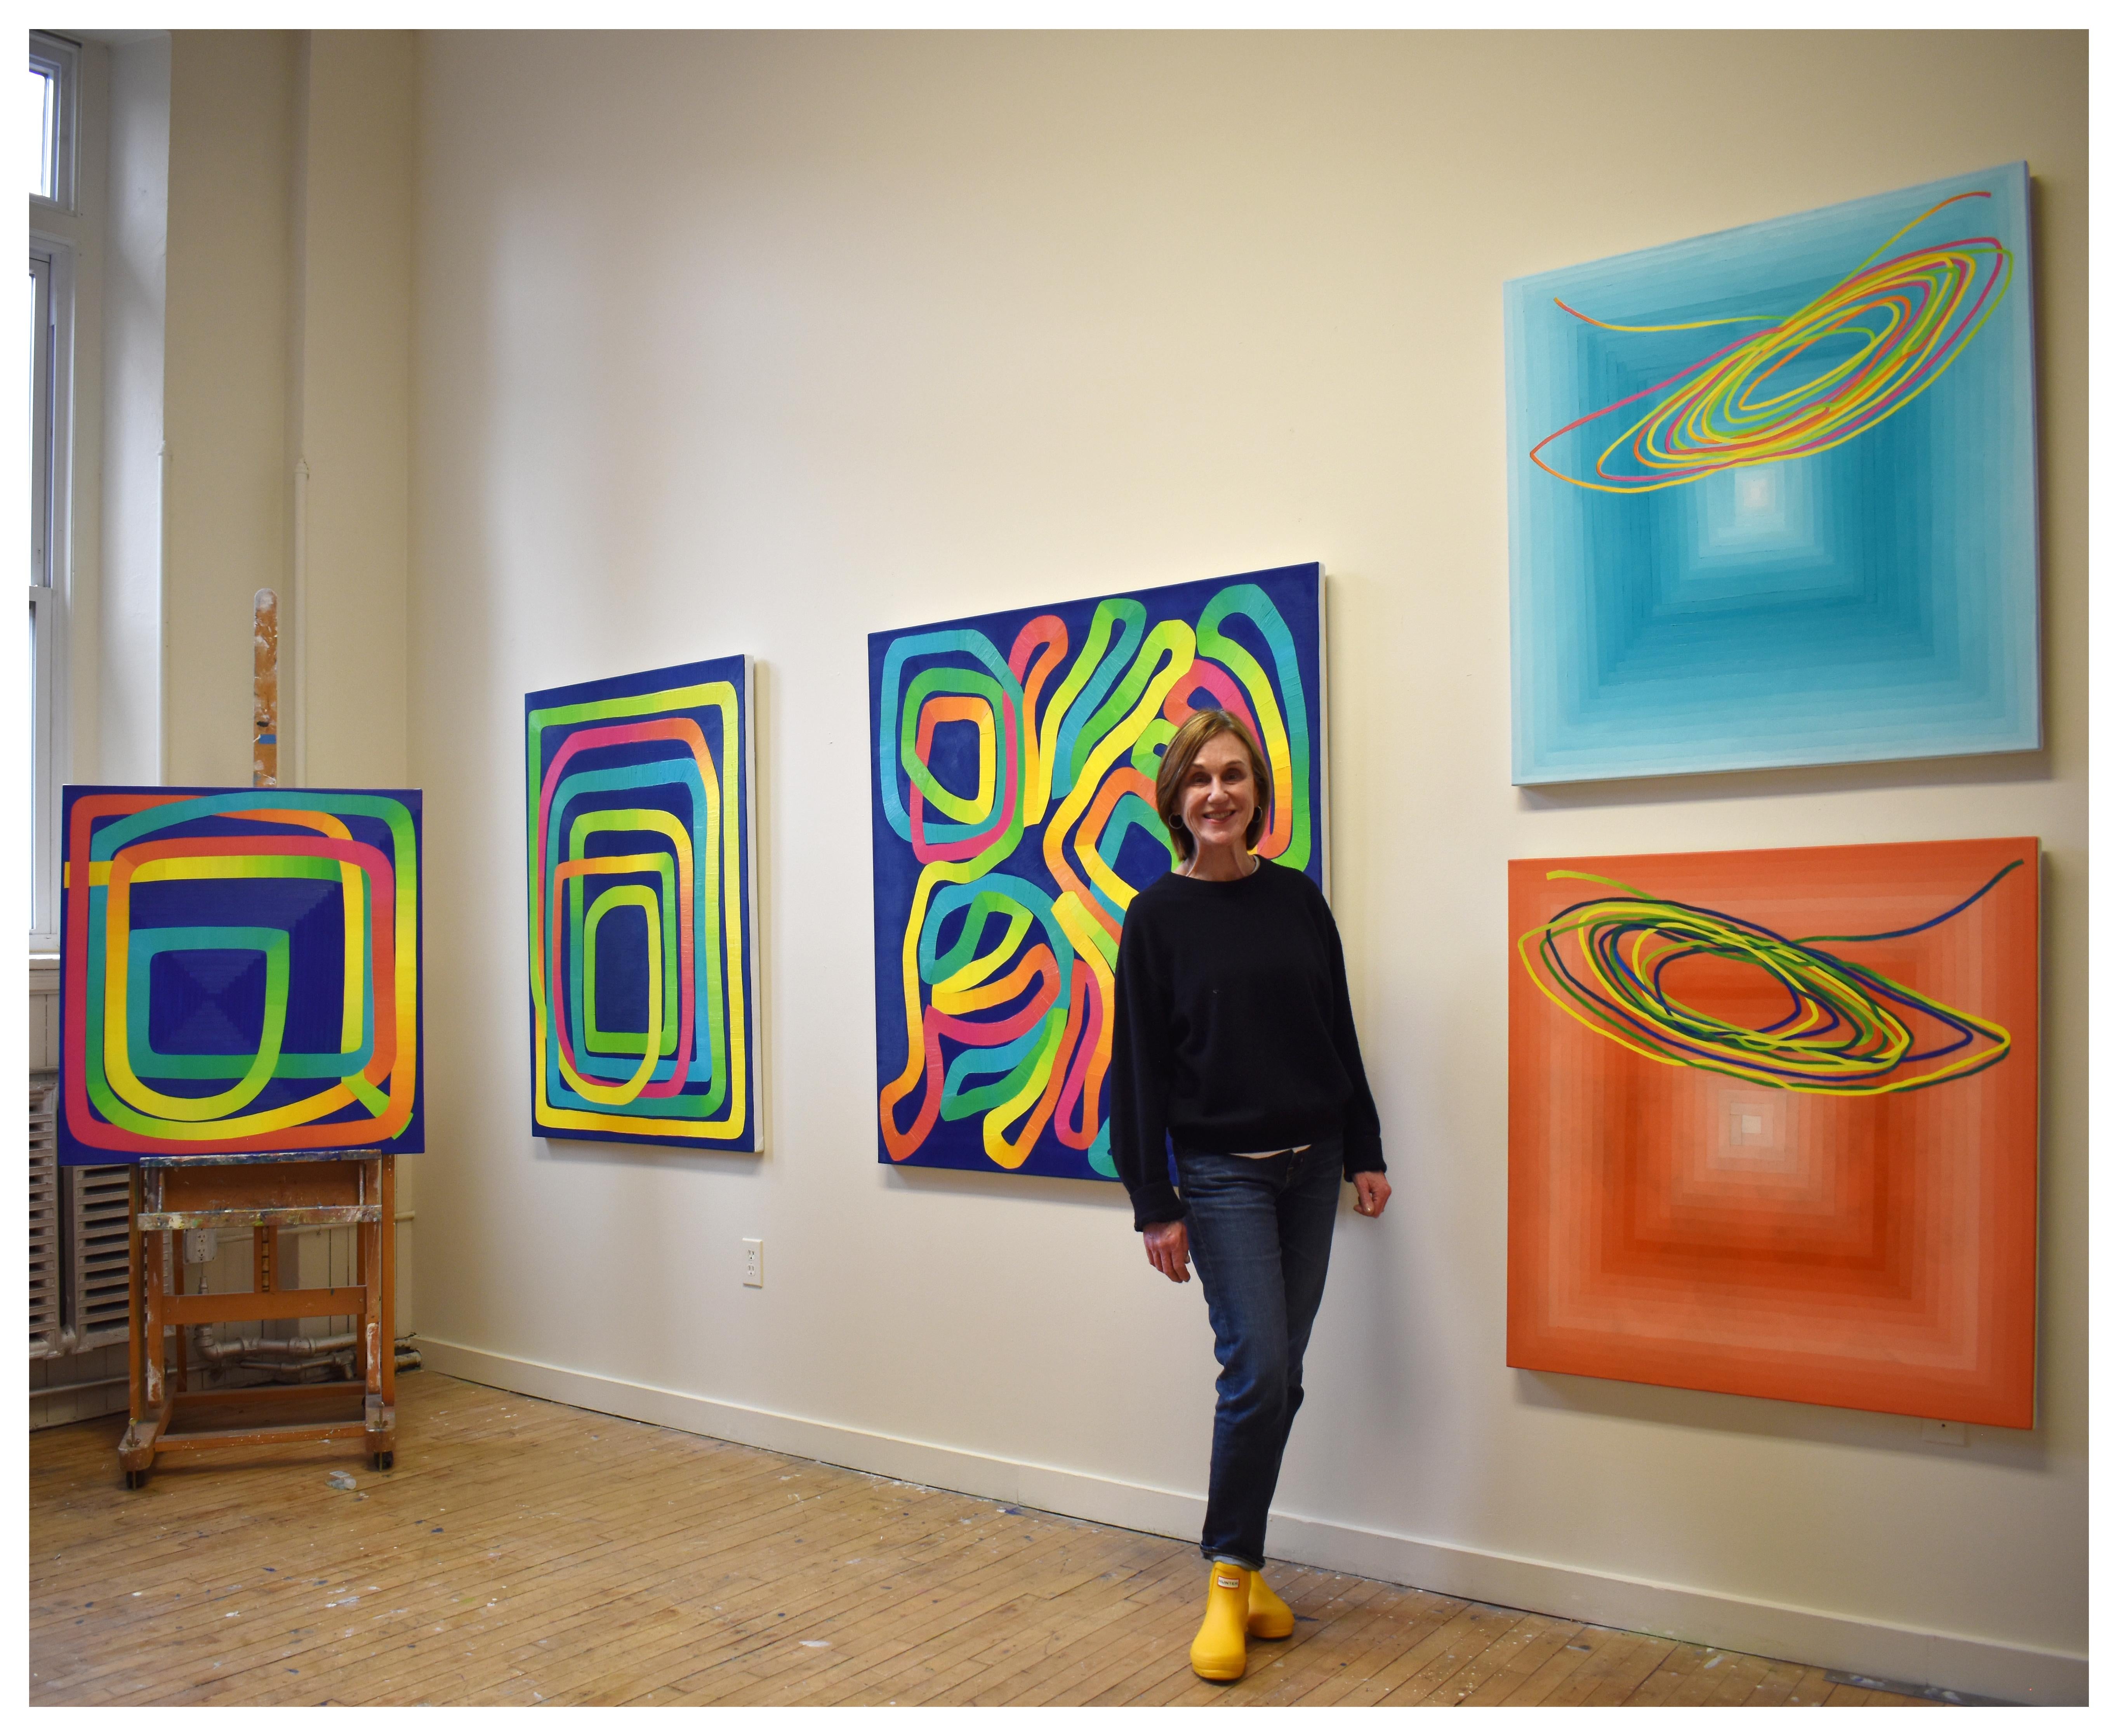 Originally from Detroit, Michigan, Paula Cahill pursued an education in the arts after relocating to the Philadelphia area. She studied the figure for many years before transitioning to complex, abstract paintings. Her paintings are exhibited in the